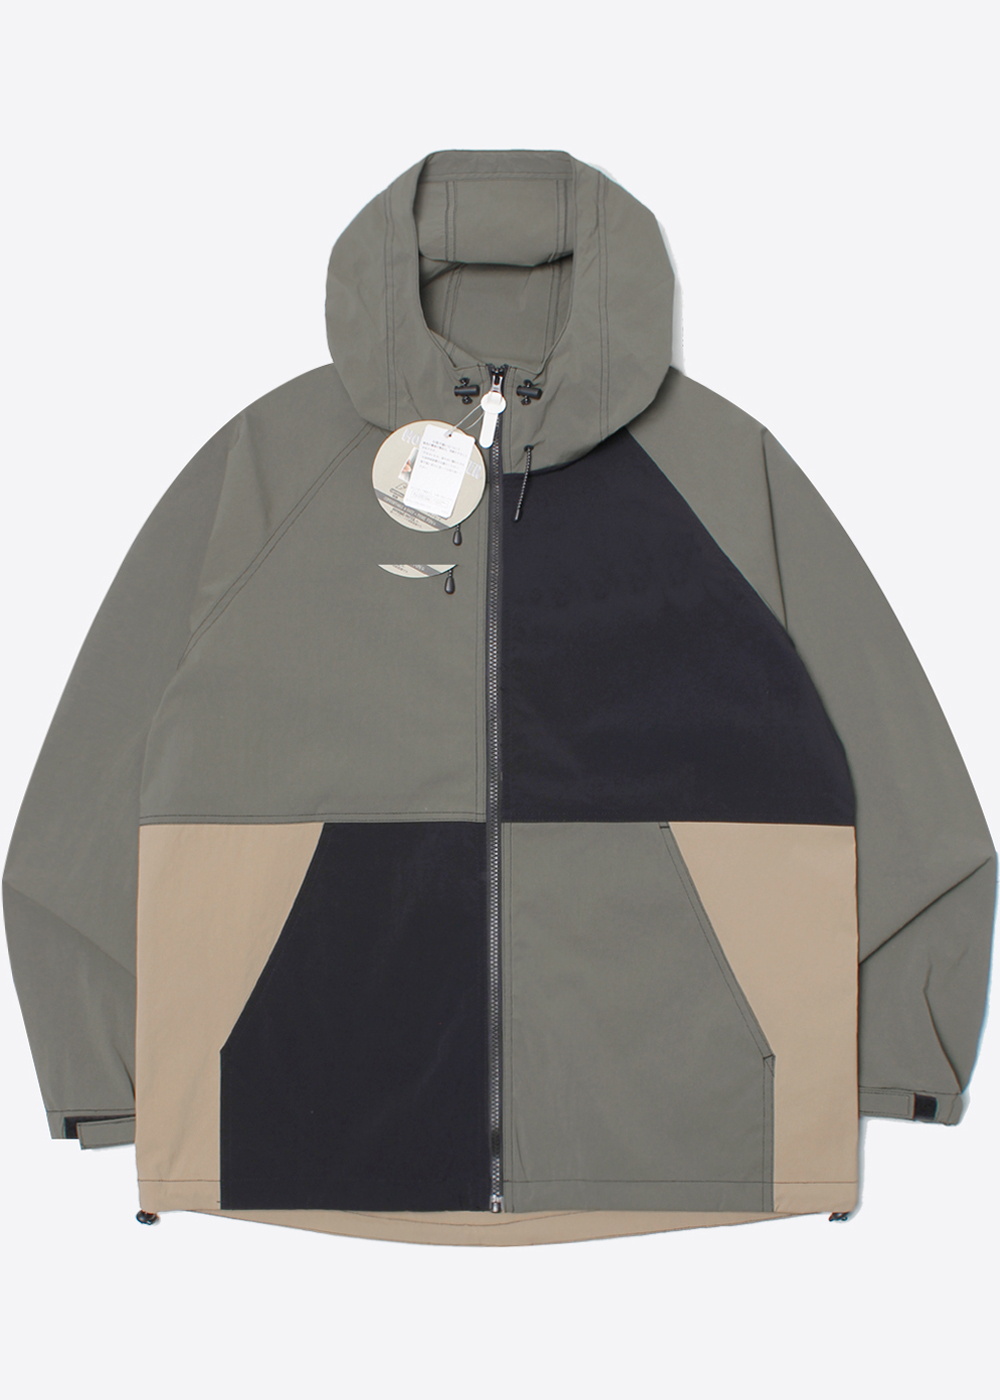 INHERIT BY JOURNAL STANDARD’over fit’murti color nylon mountain parka